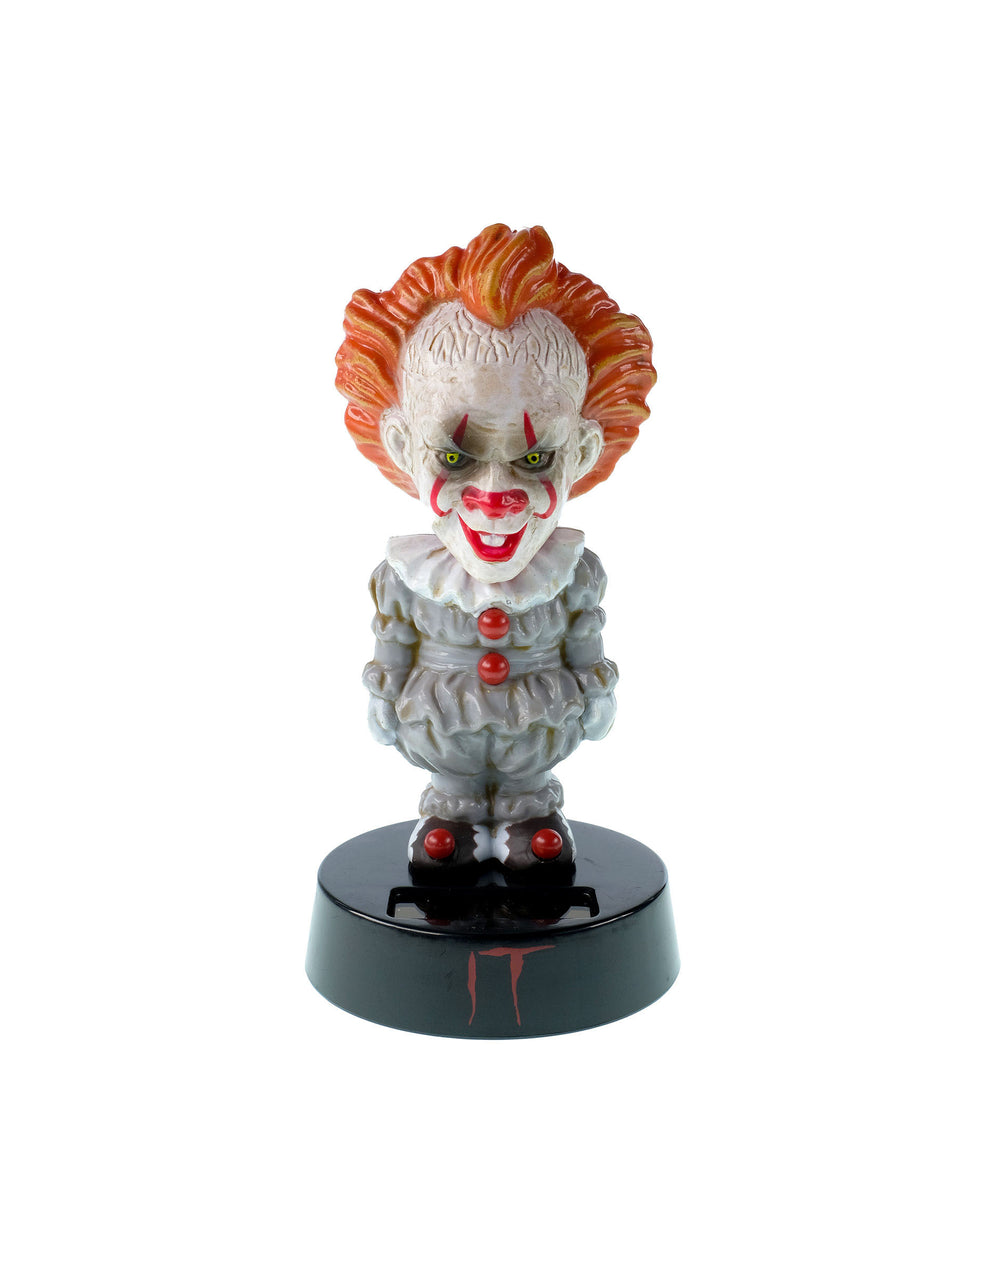 It: Pennywise the Dancing Clown Solar Bobblehead